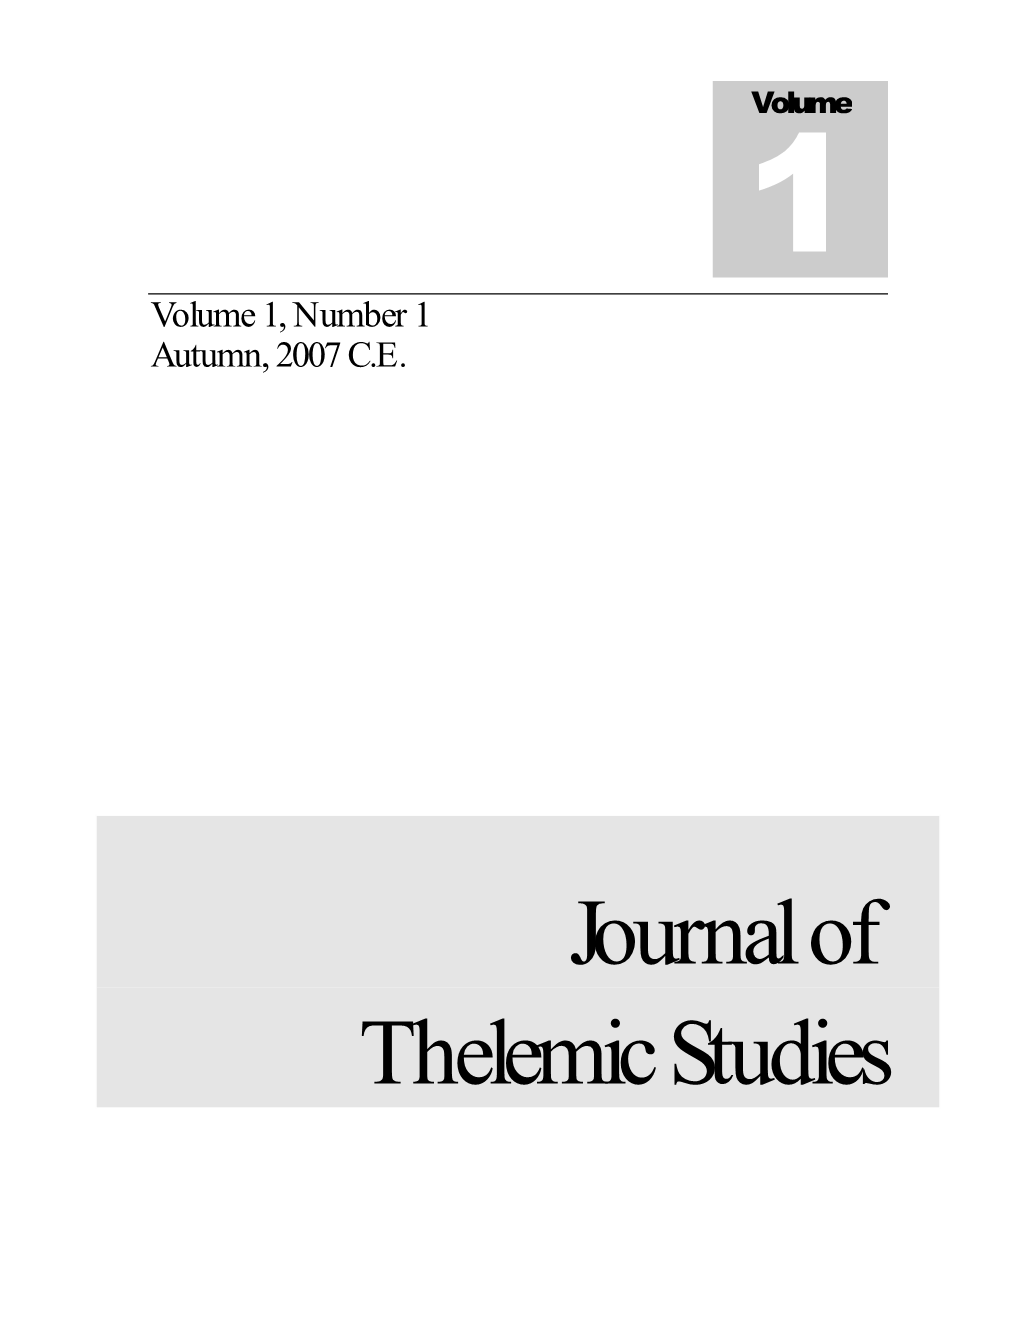 Journal of Thelemic Studies JOURNAL of THELEMIC STUDIES Volume 1, Number 1